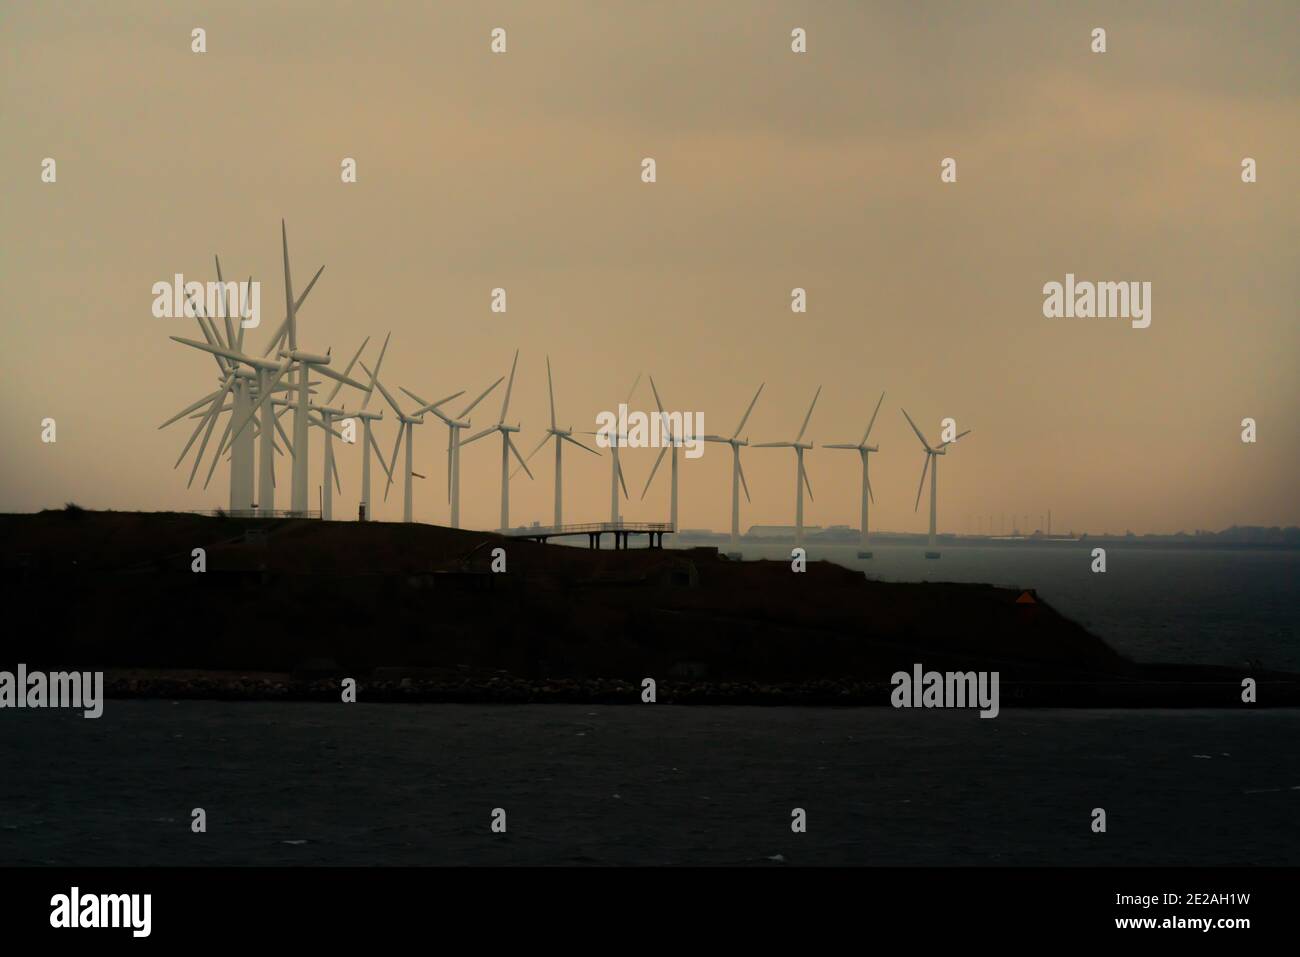 Massive offshore wind turbines generating clean green energy from ocean winds. Stock Photo